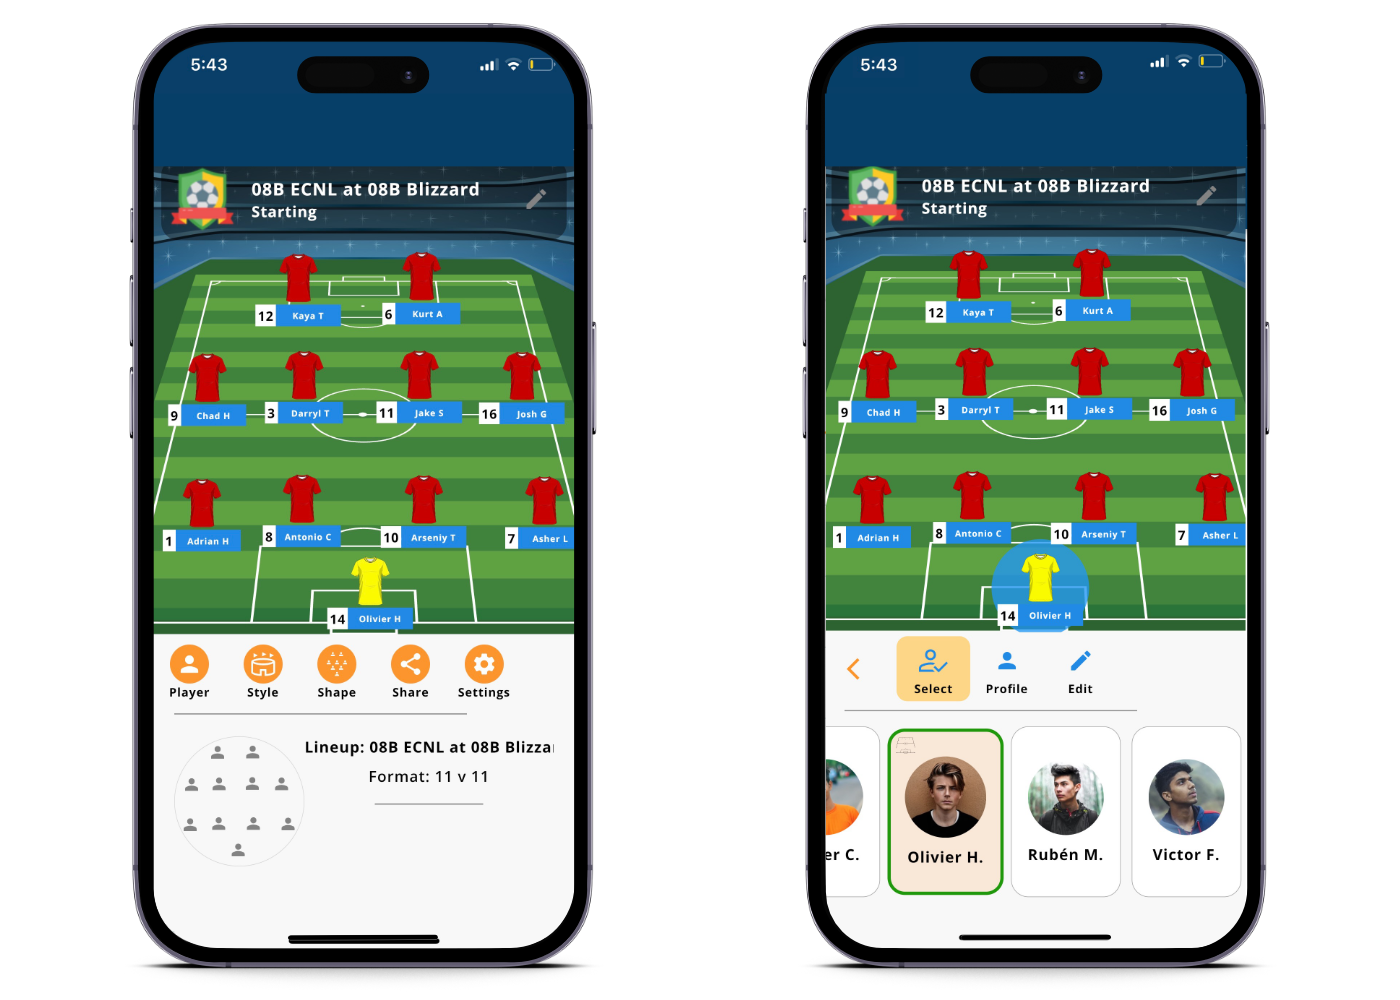 Byga youth sports club management lineup features on mobile